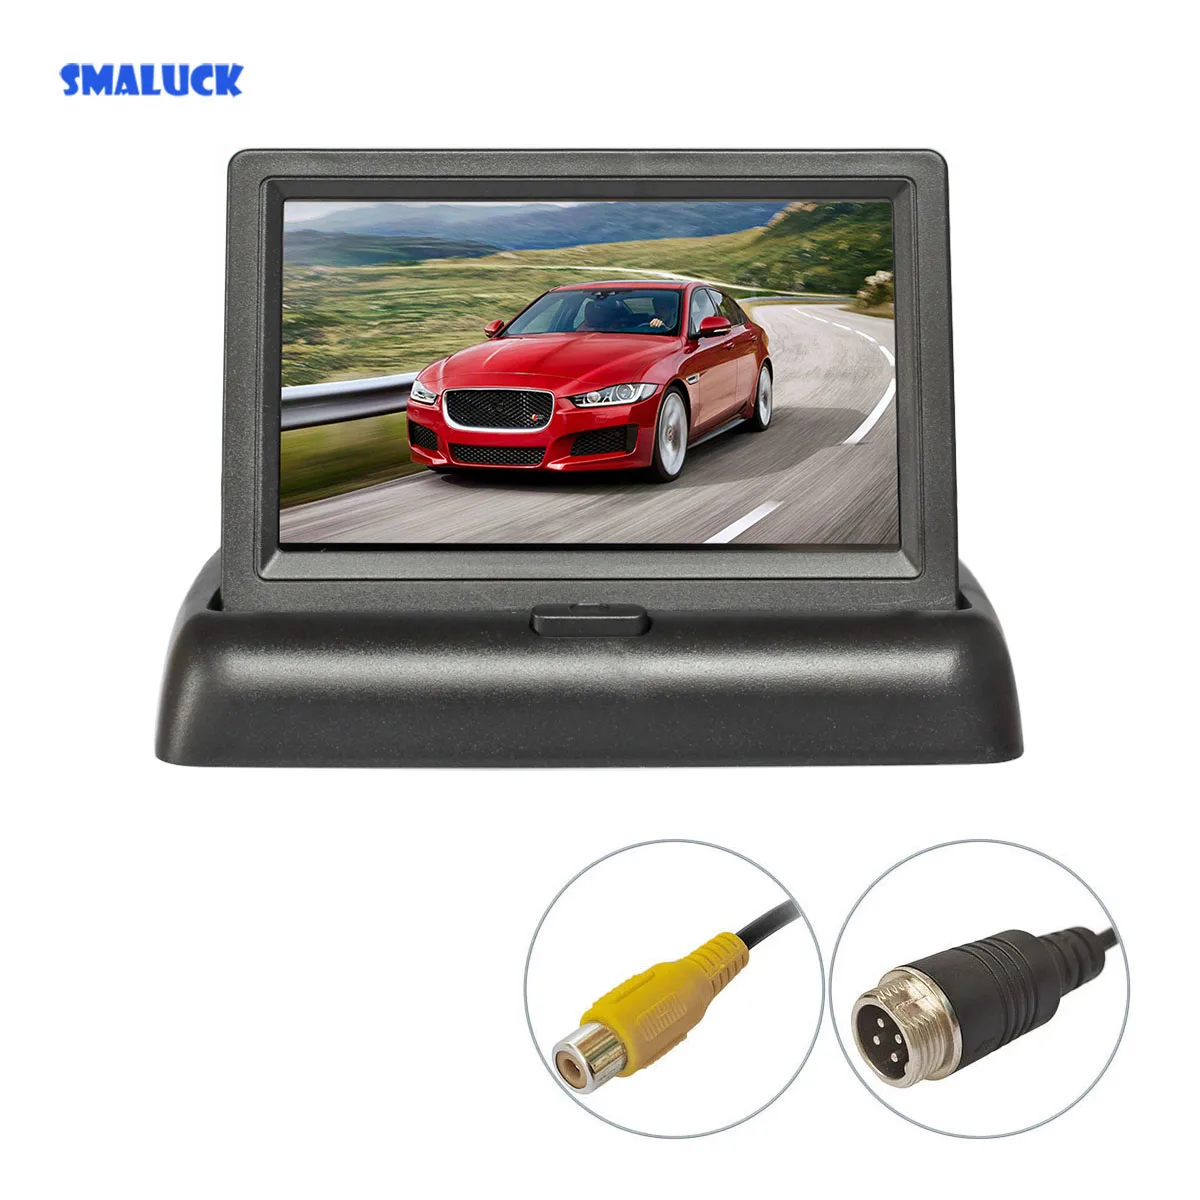 

SMALUCK 4.3" Foldable TFT LCD Car Reverse Rear View Car Monitor for Camera DVD VCR